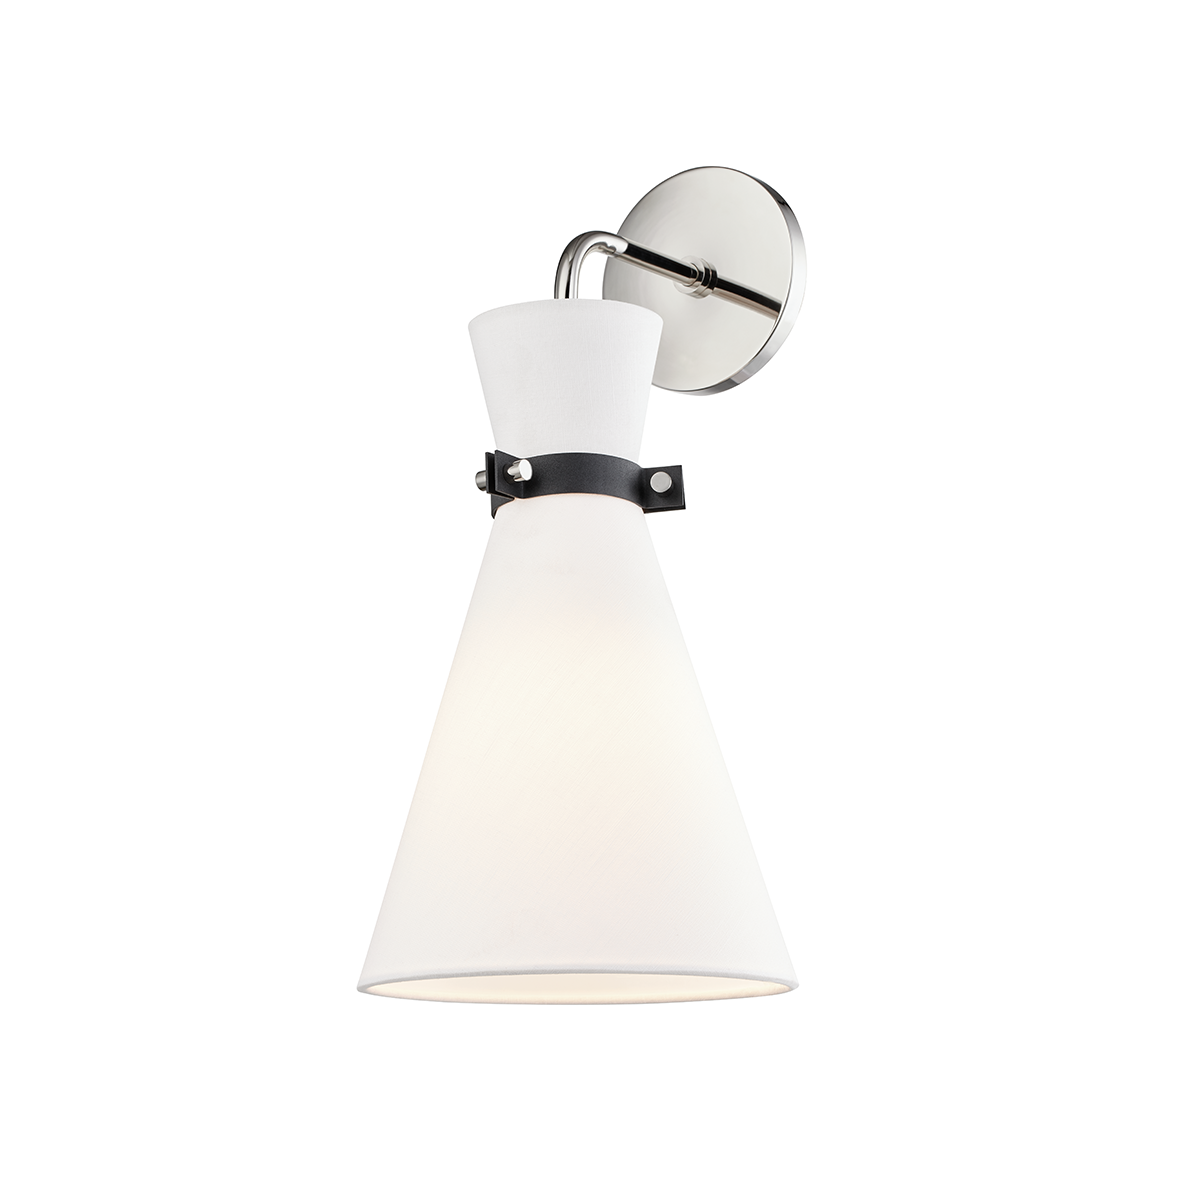 Hudson Valley Lighting Julia Wall Sconce with a White Linen Shade